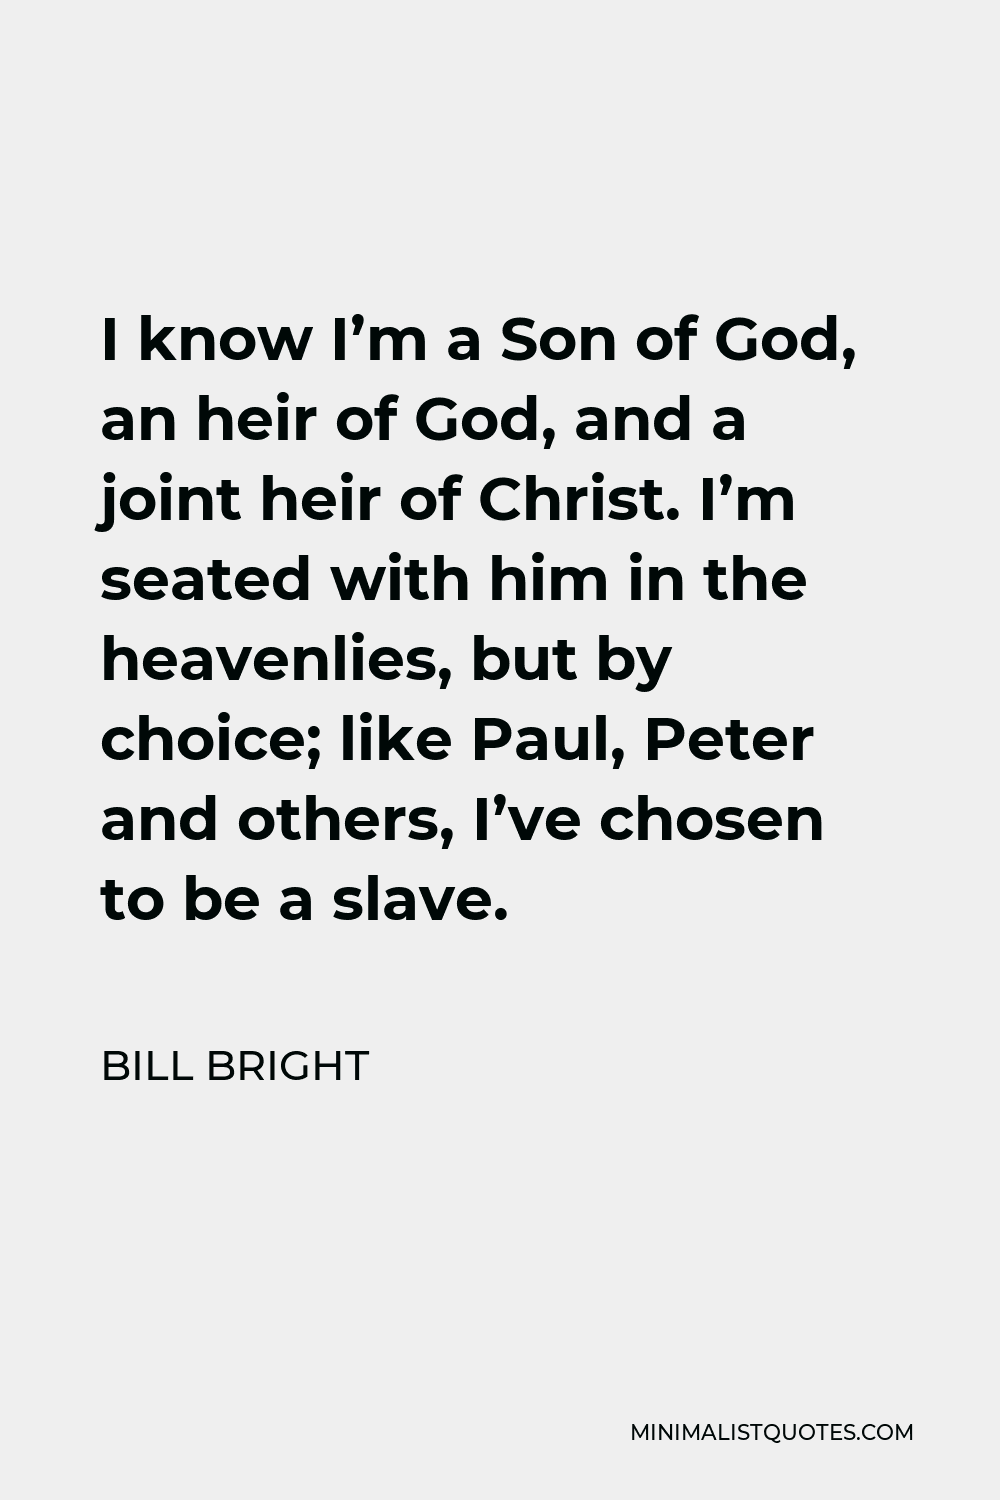 Bill Bright Quote - I know I’m a Son of God, an heir of God, and a joint heir of Christ. I’m seated with him in the heavenlies, but by choice; like Paul, Peter and others, I’ve chosen to be a slave.